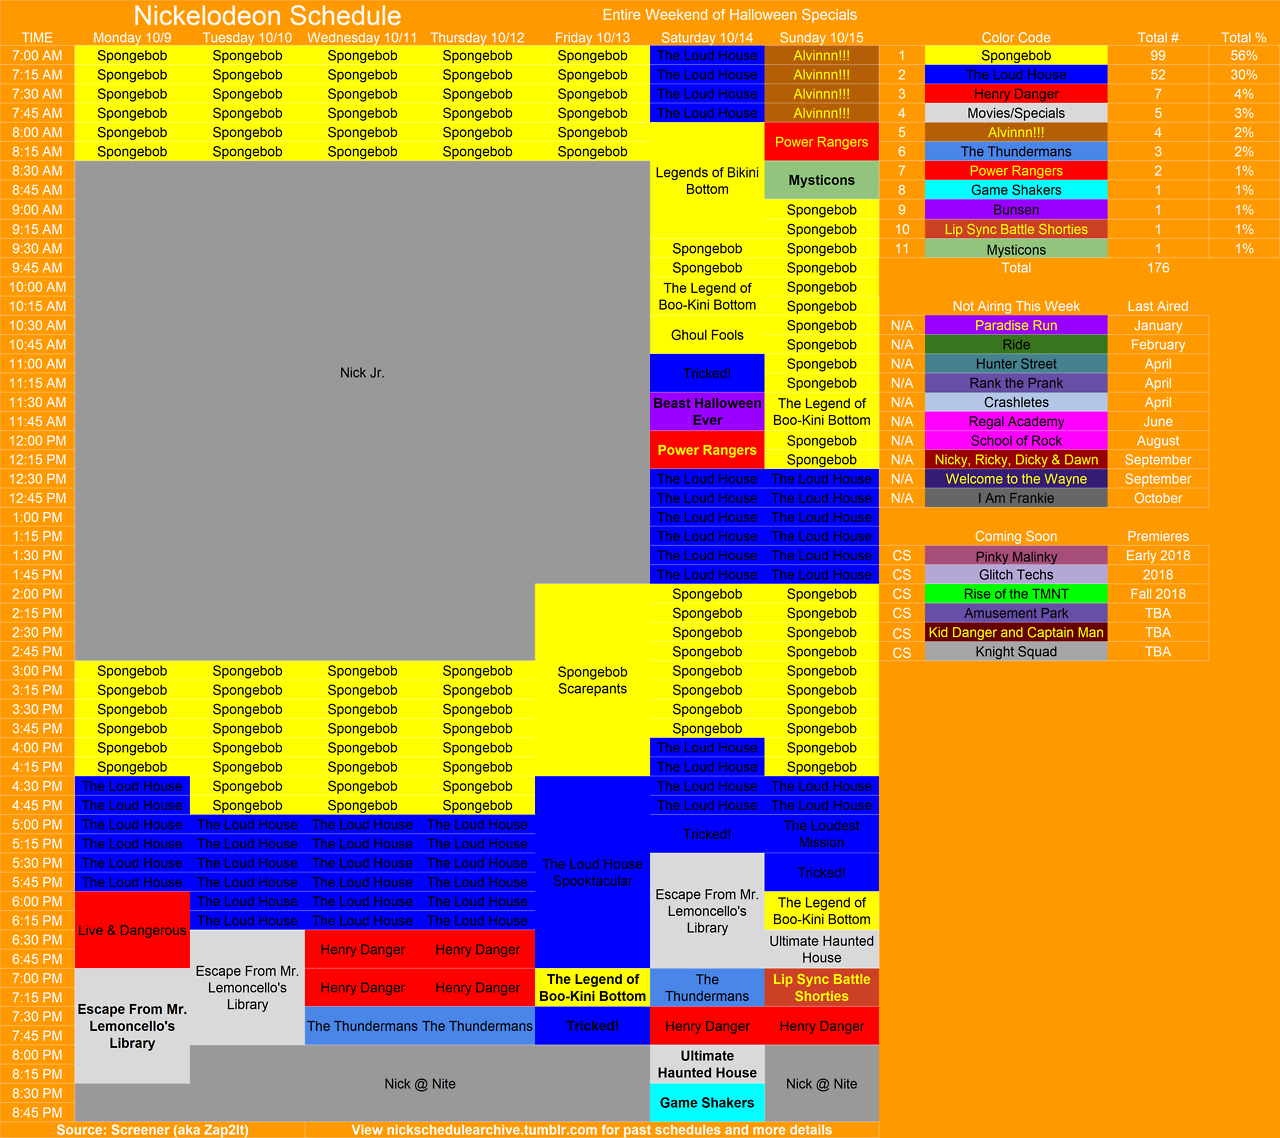 Nickelodeon Schedule Archive — Here’s the Nickelodeon schedule from